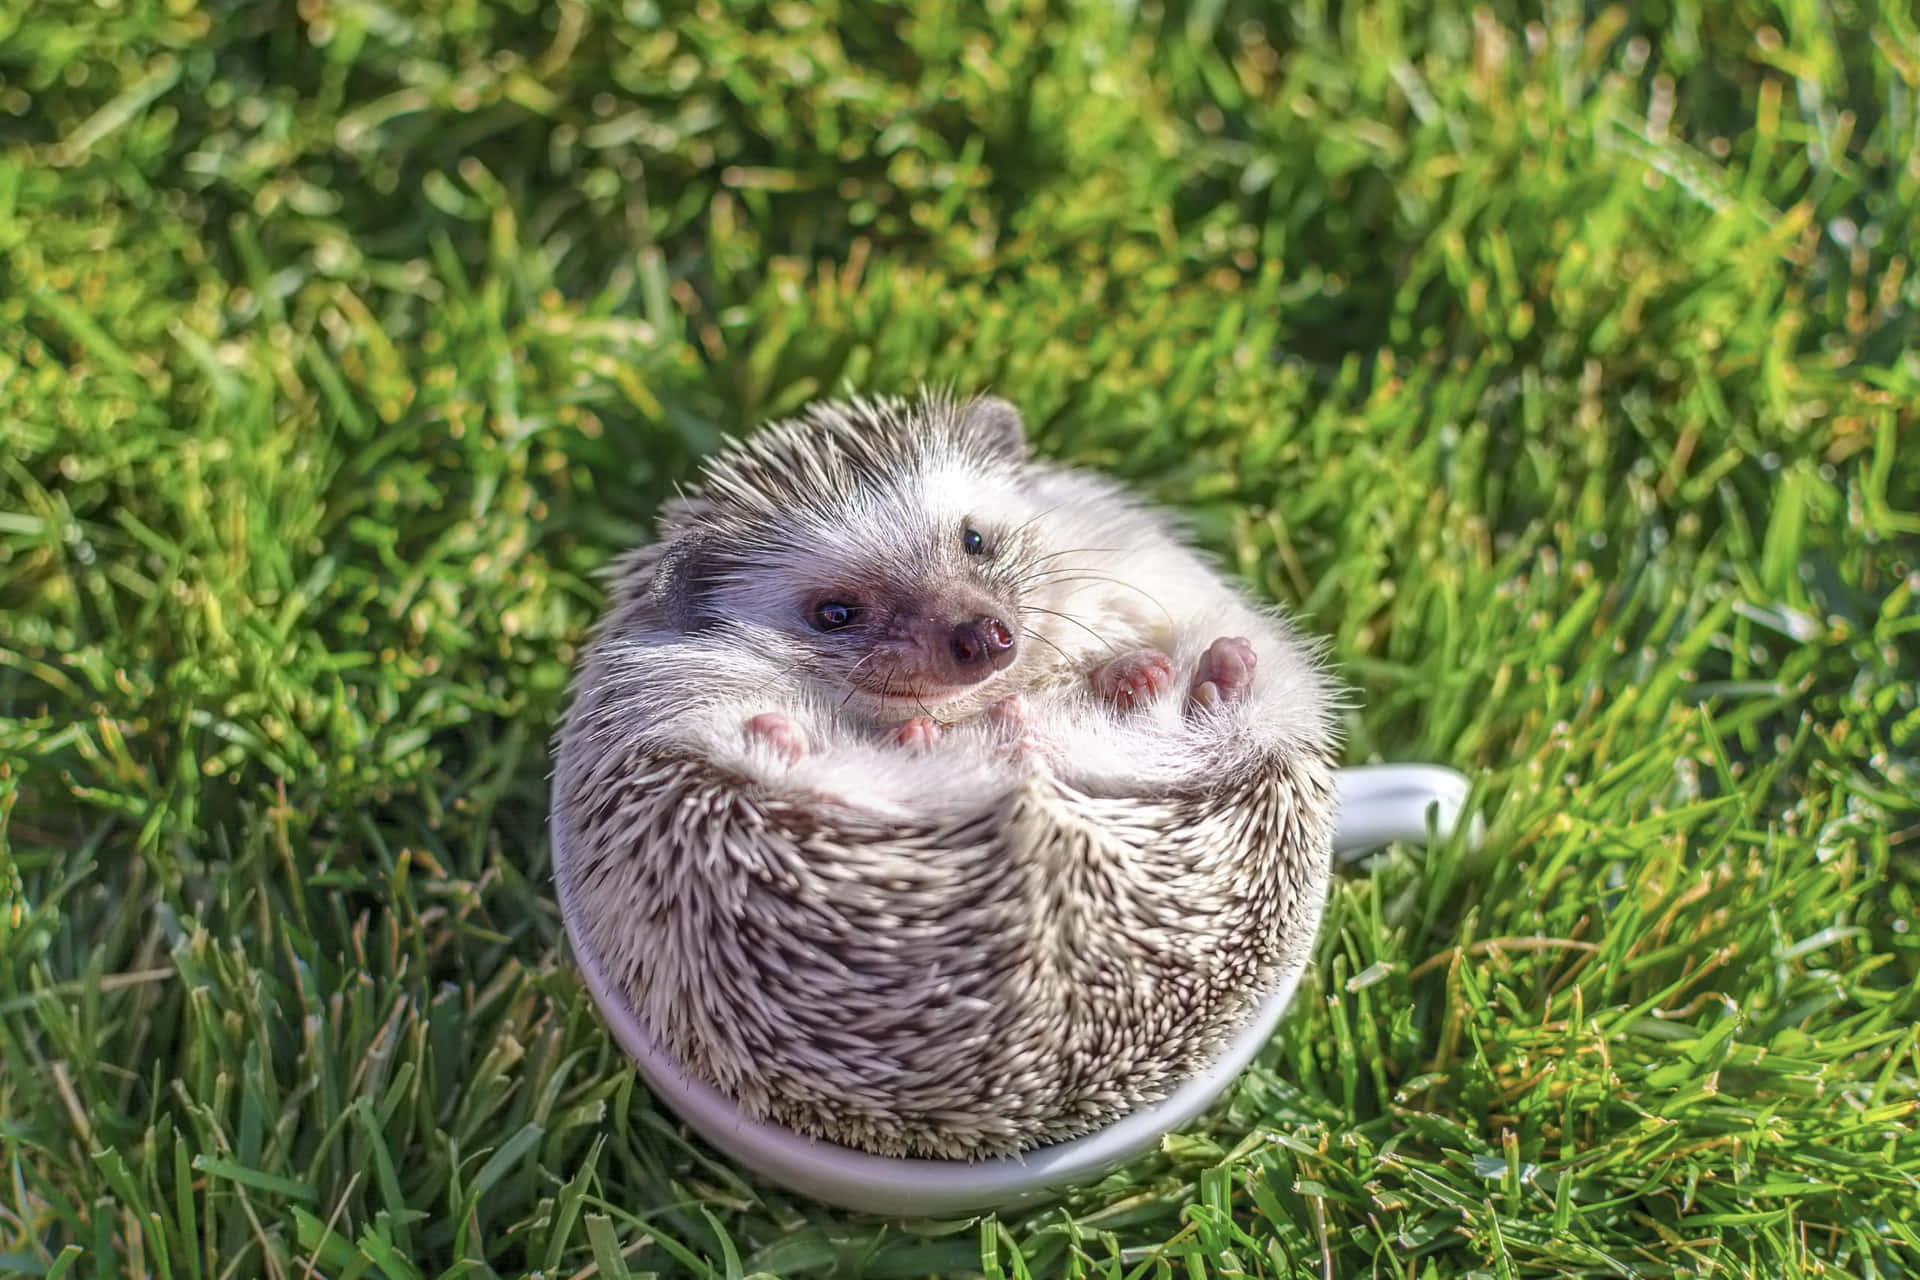 Cute Hedgehog Inside Cup On Grass Picture